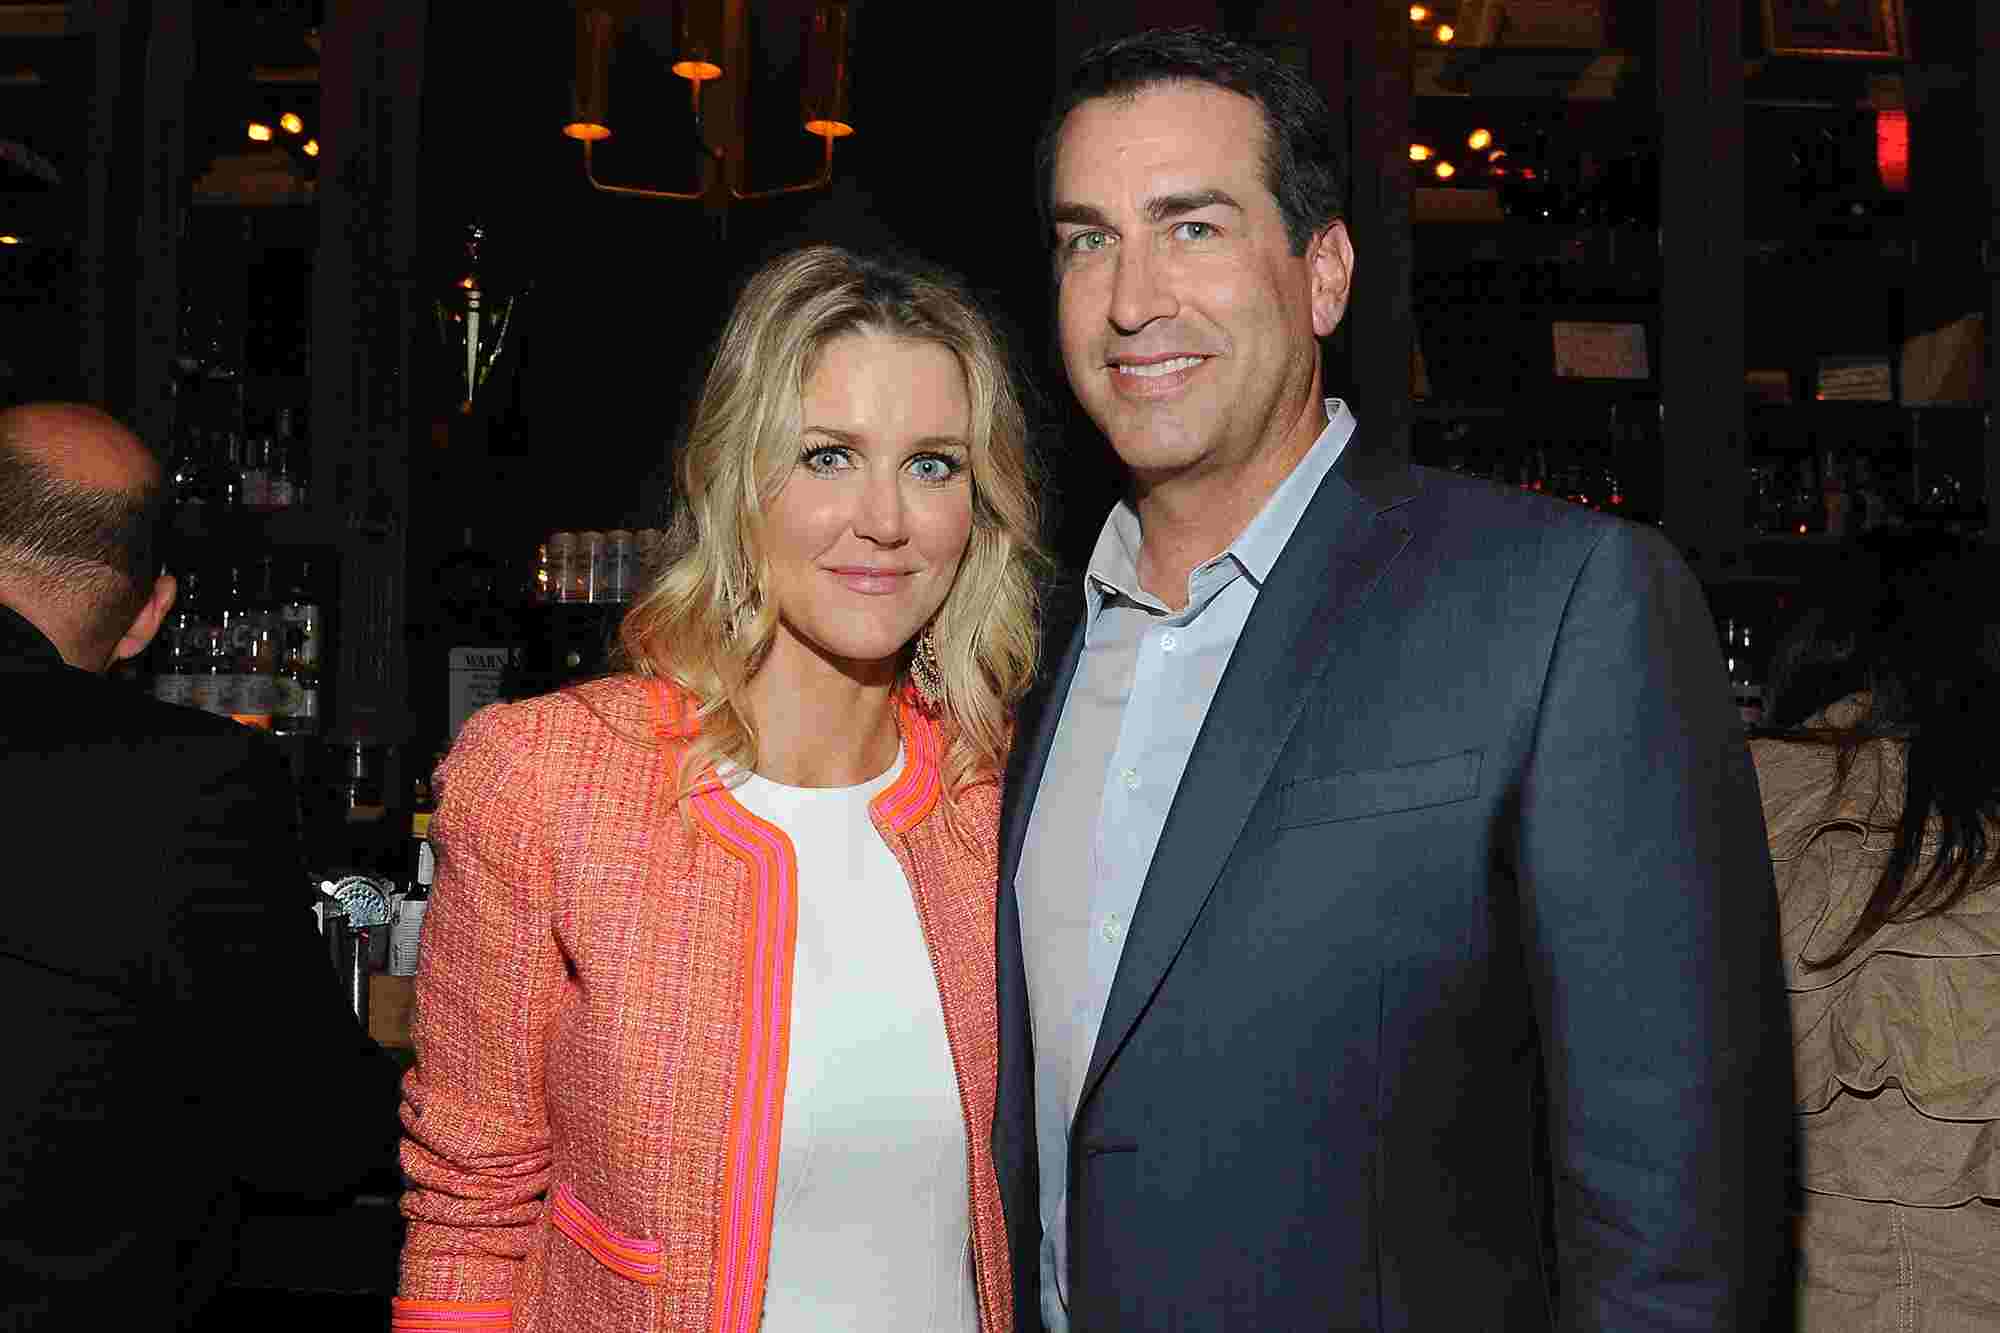 Image of American actor, Rob Riggle and his wife, Tiffany Riggle